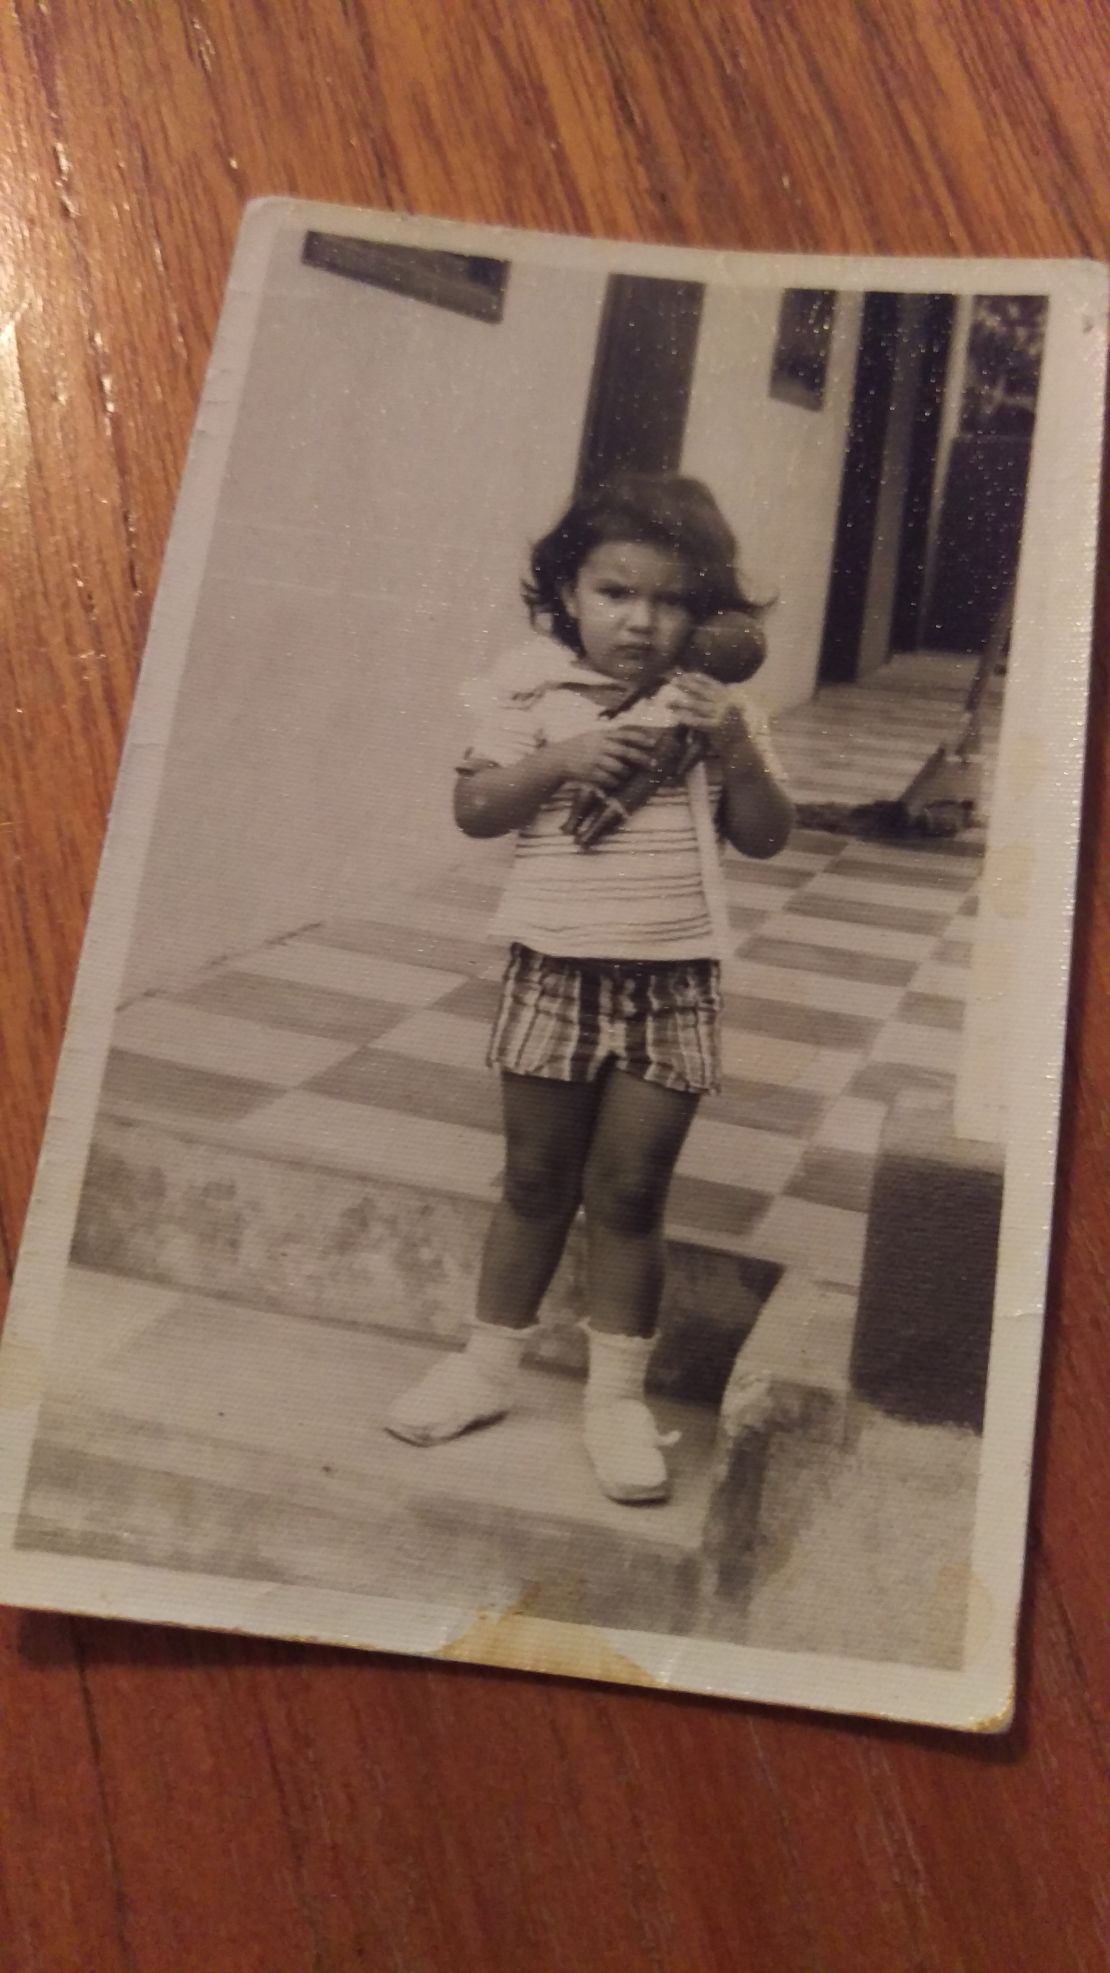 Berta Cáceres, pictured as a toddler in Honduras. Her nephew says she learned from a young age to care about less fortunate people. 